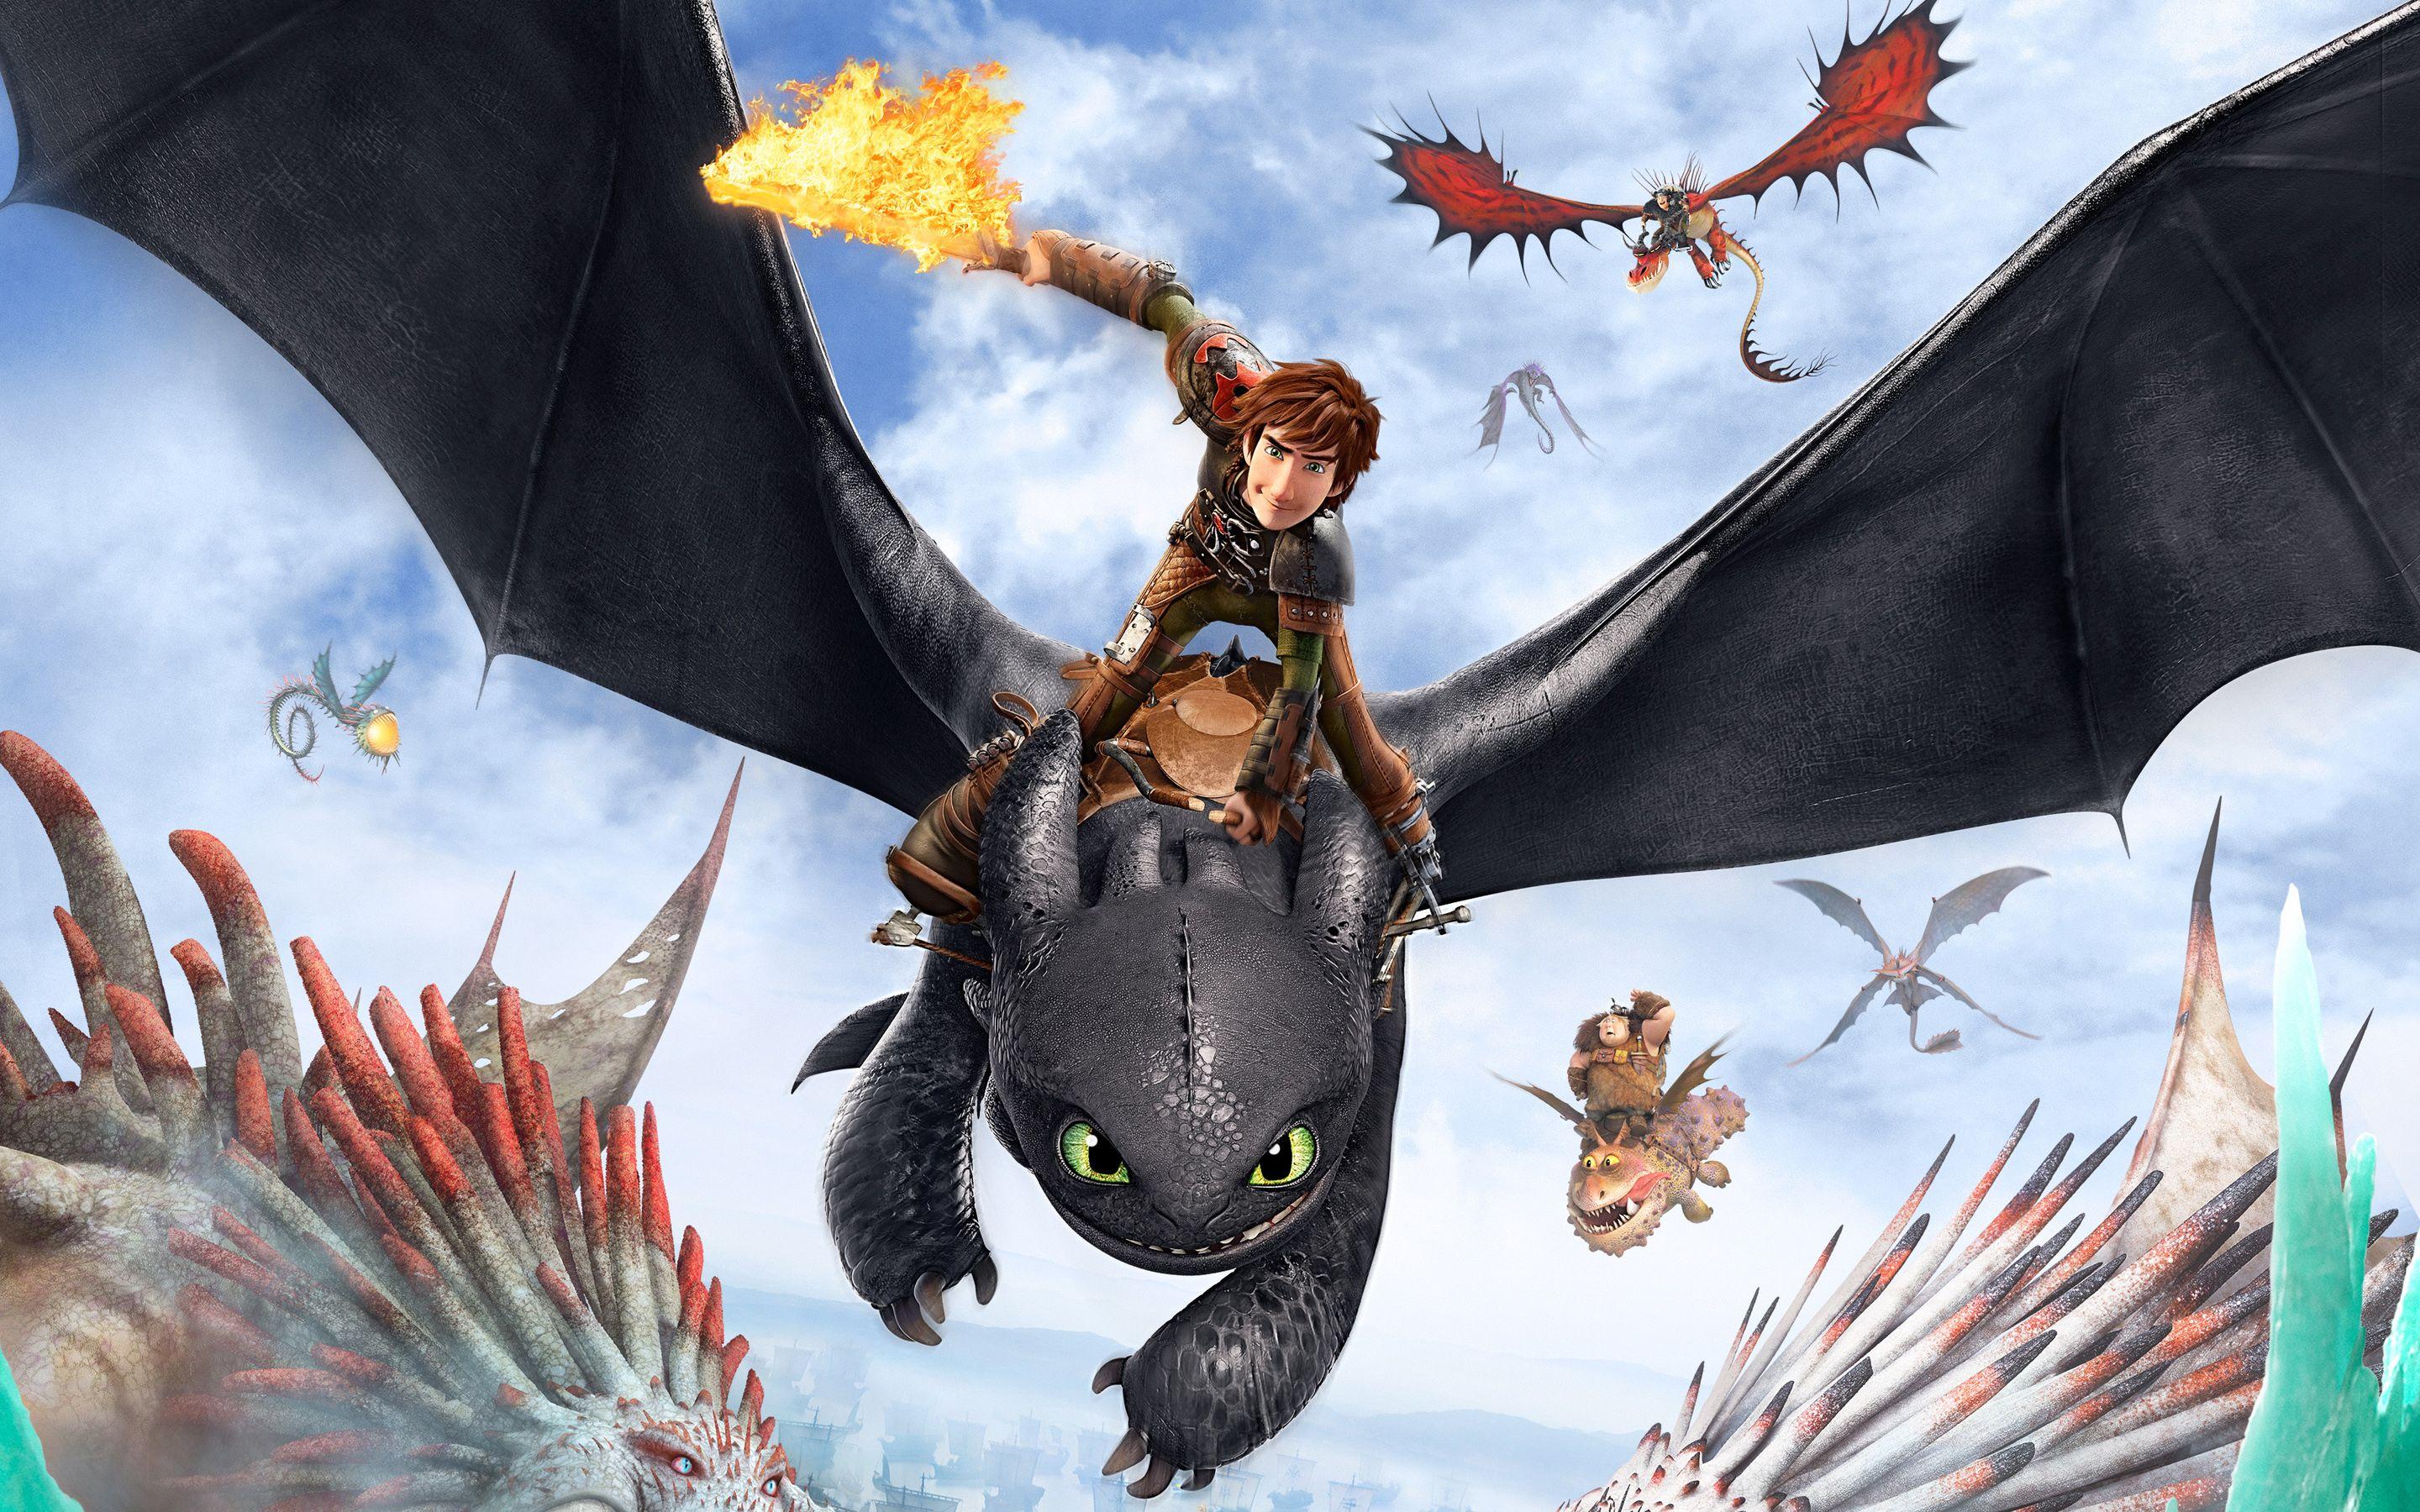 Movies How to Train Your Dragon 2 wallpaper Desktop, Phone, Tablet